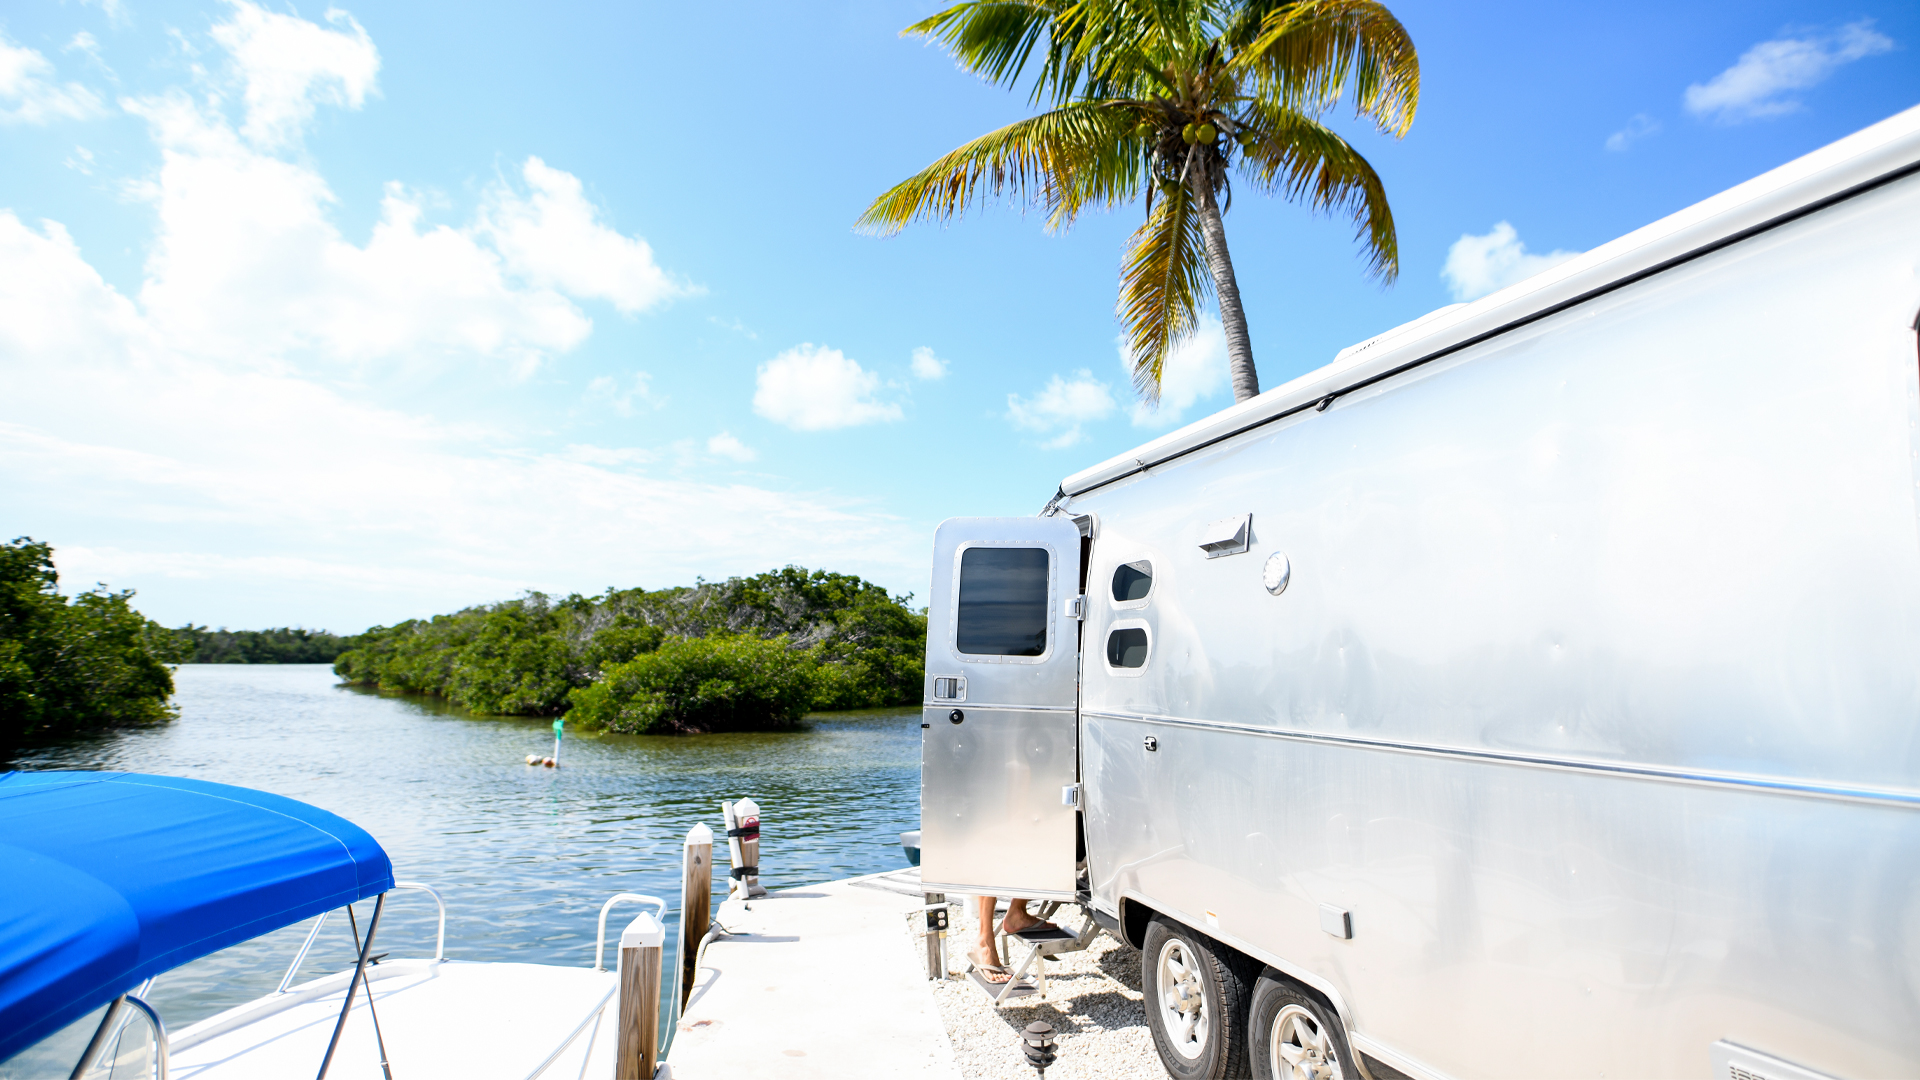 An Airstream travel trailer at a campground in Key West Florida.